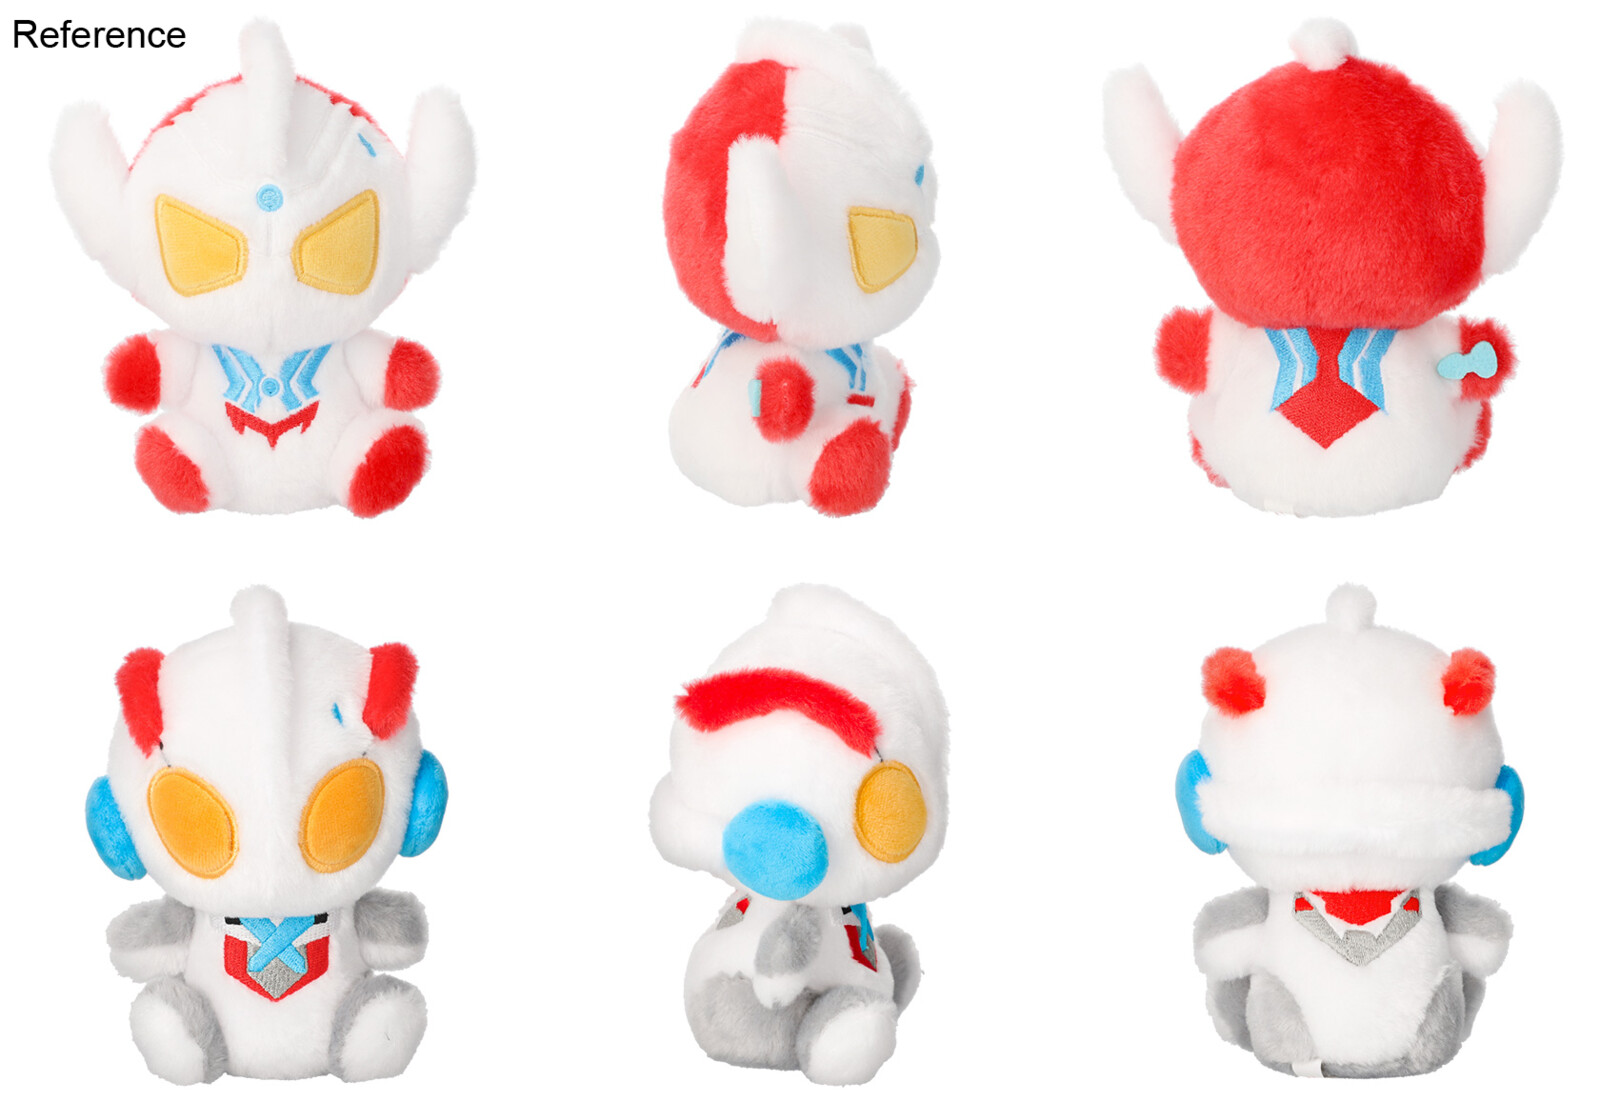 Official plush photos used as reference